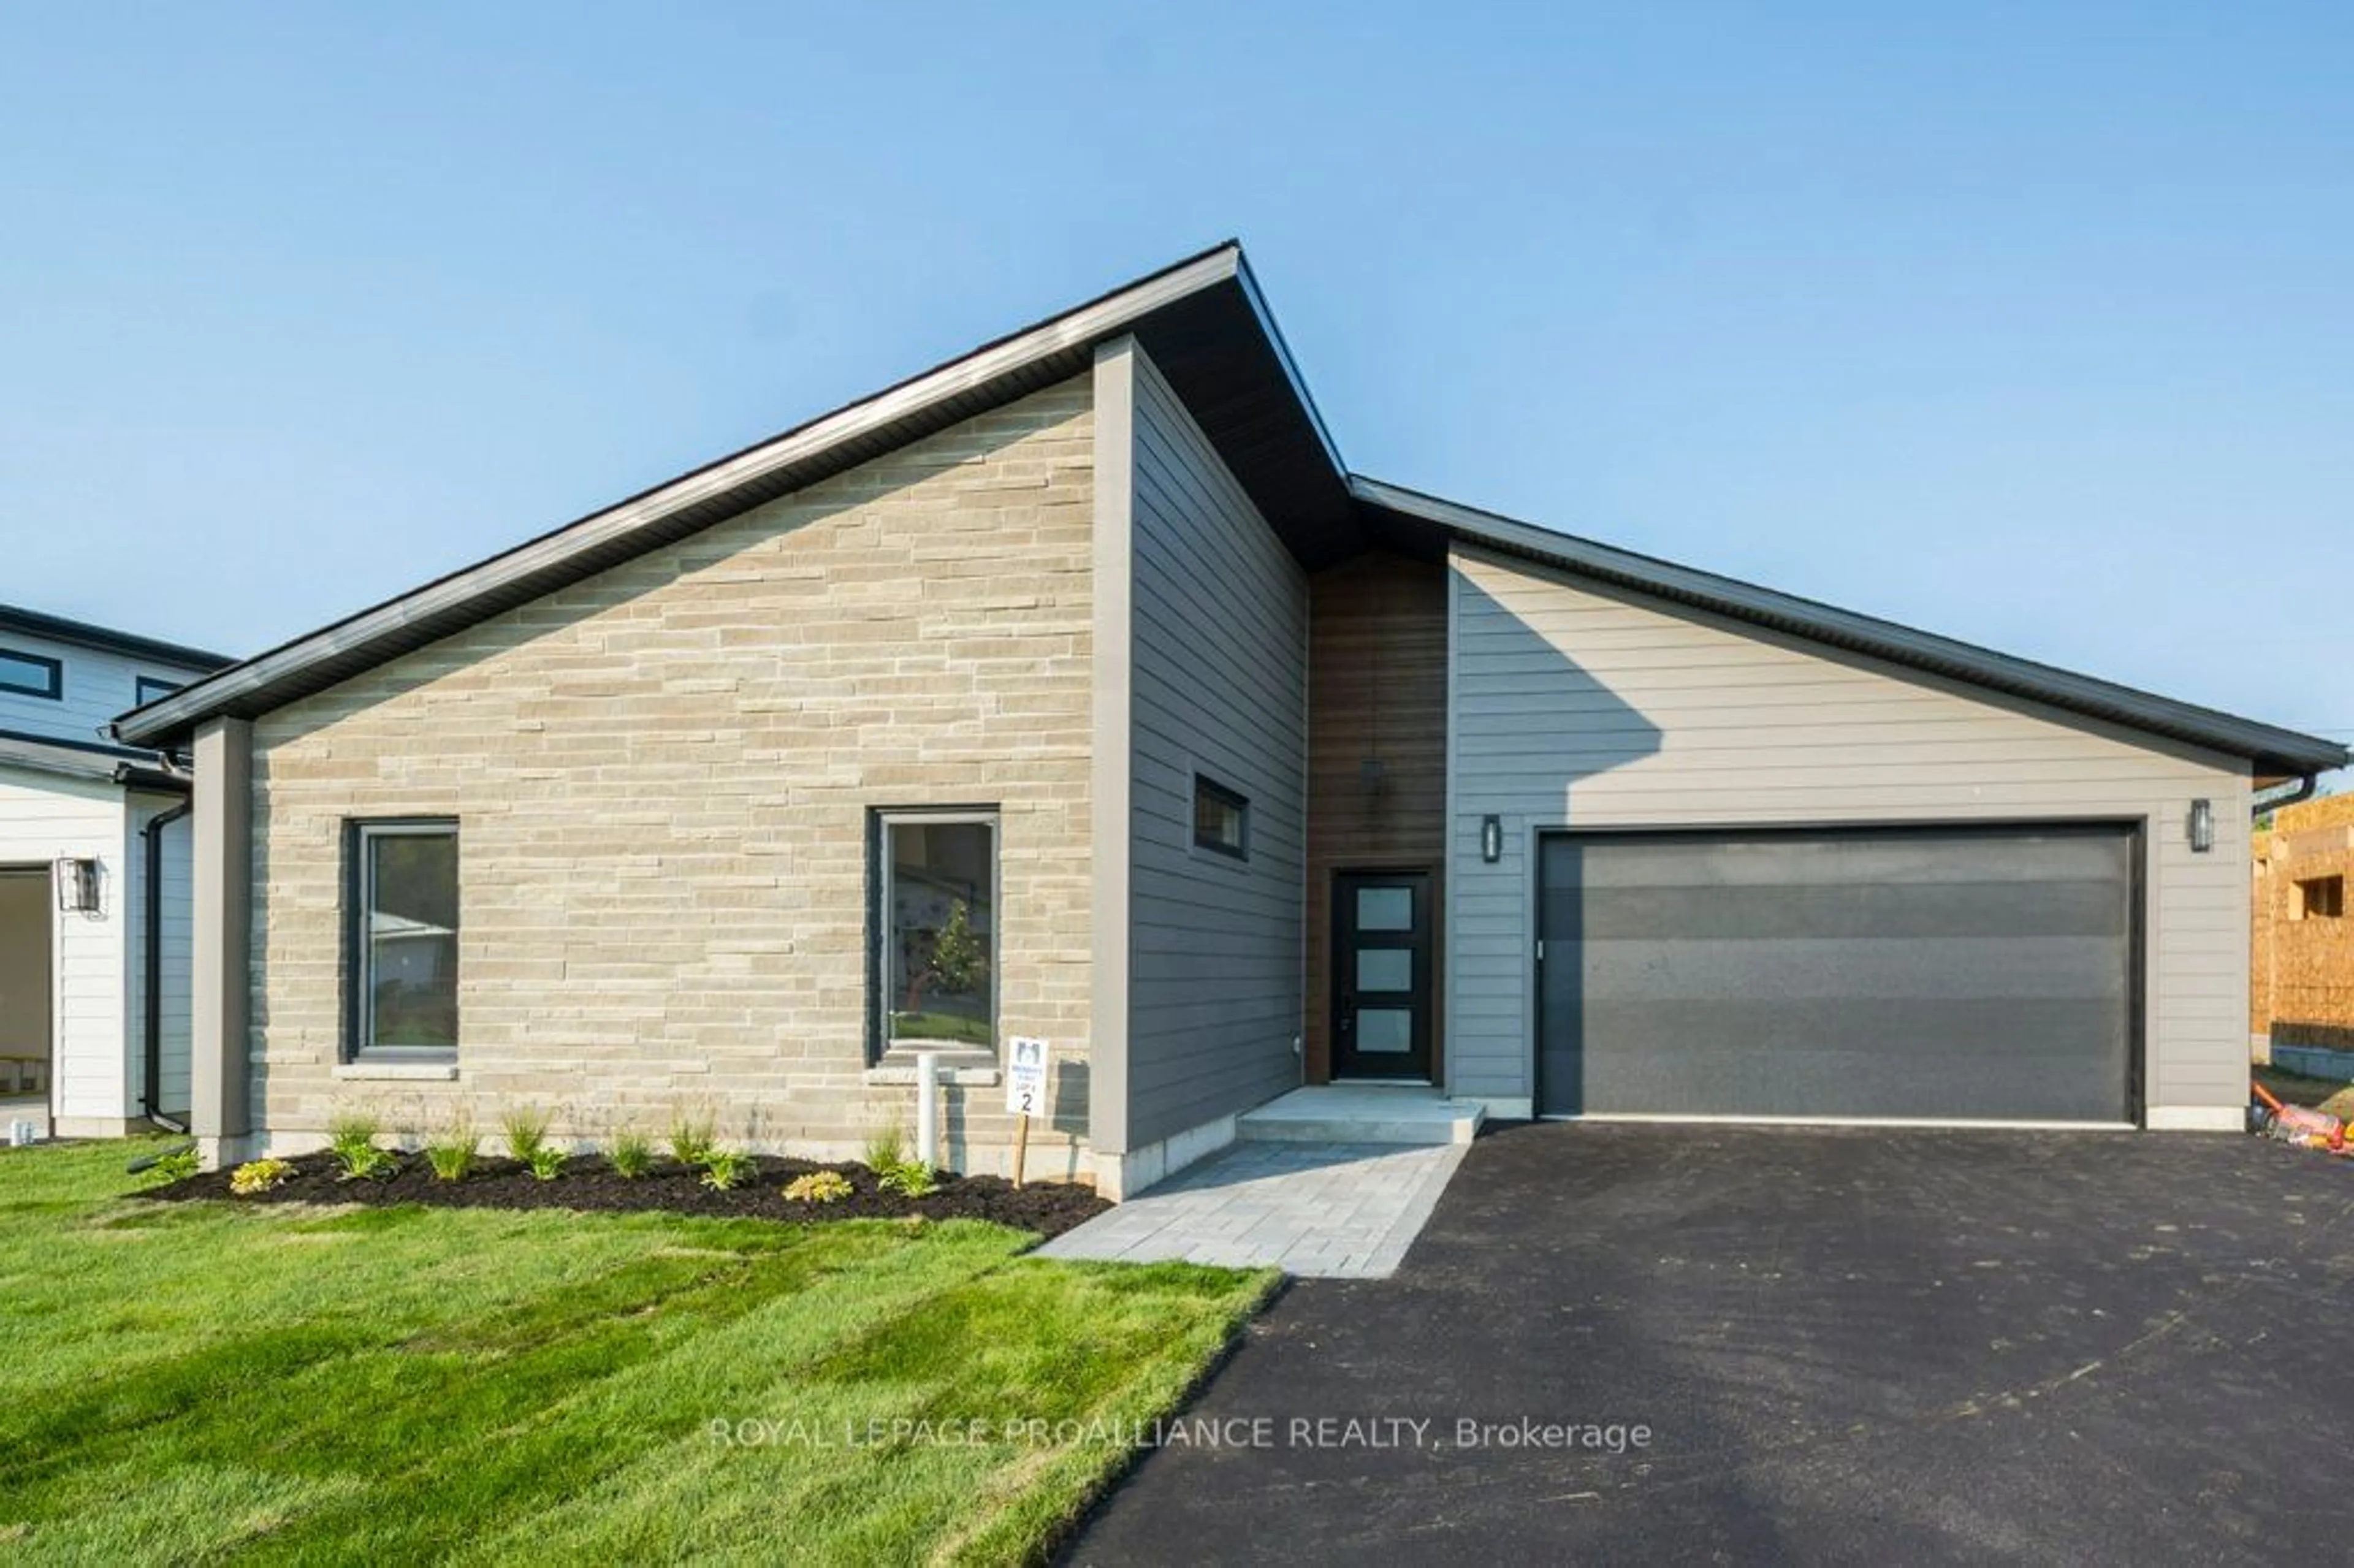 Home with brick exterior material for 60 Fraser Dr, Quinte West Ontario K0K 1K0